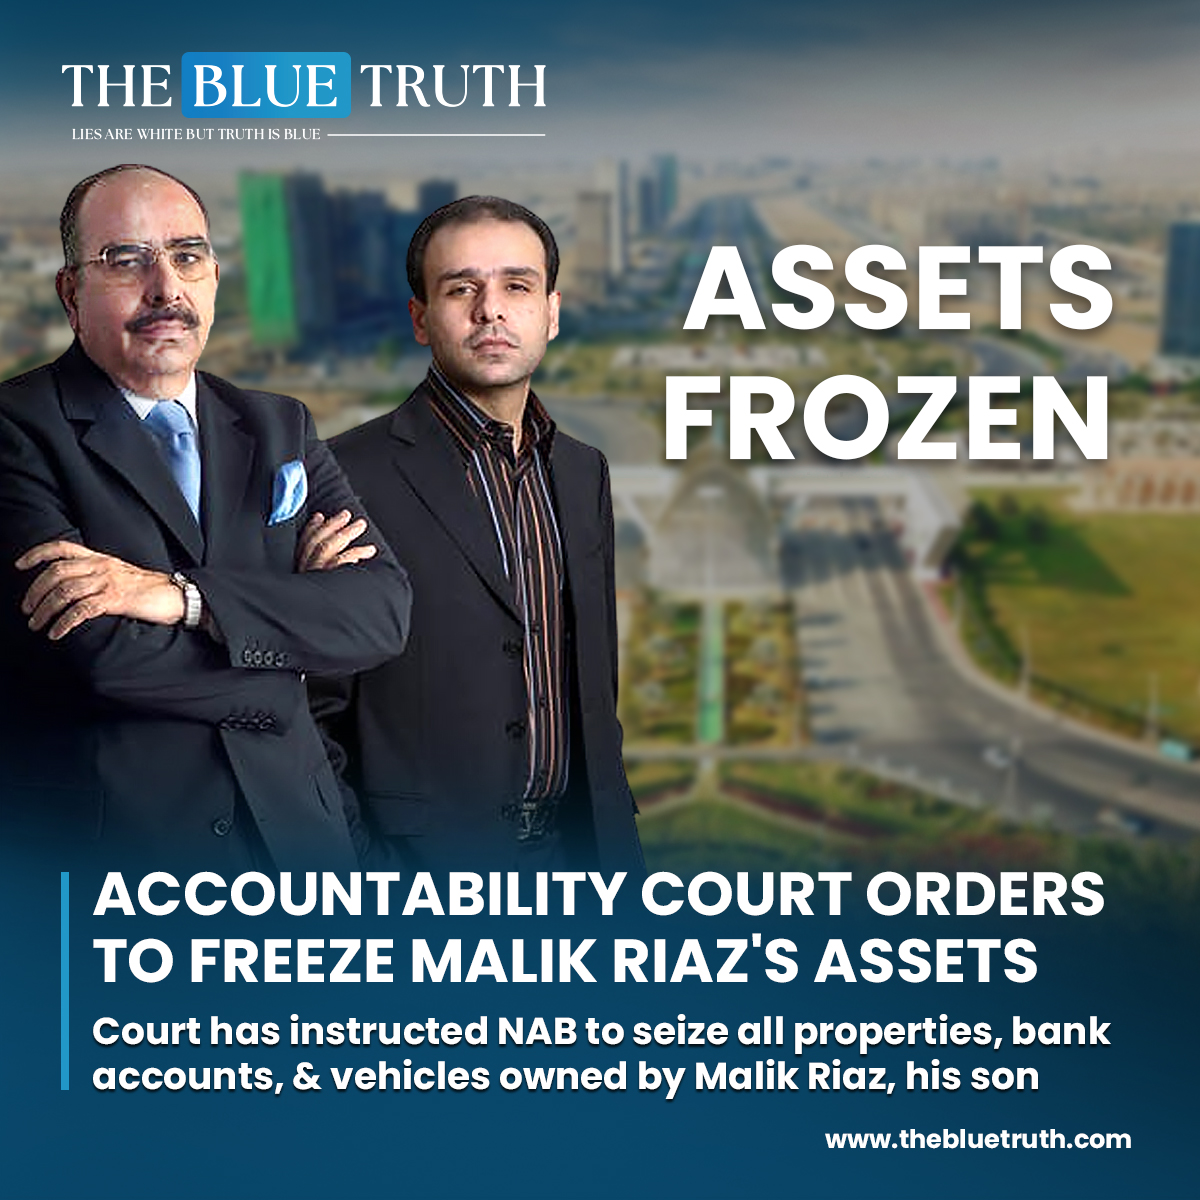 Accountability Court has ordered seizing all property and assets in Pakistan owned by property tycoon. #AccountabilityCourt #MalikRiaz #AssetFreeze #NABInvestigation #CorruptionCase #FinancialAccountability #WealthFreeze #tbt #TheBlueTruth